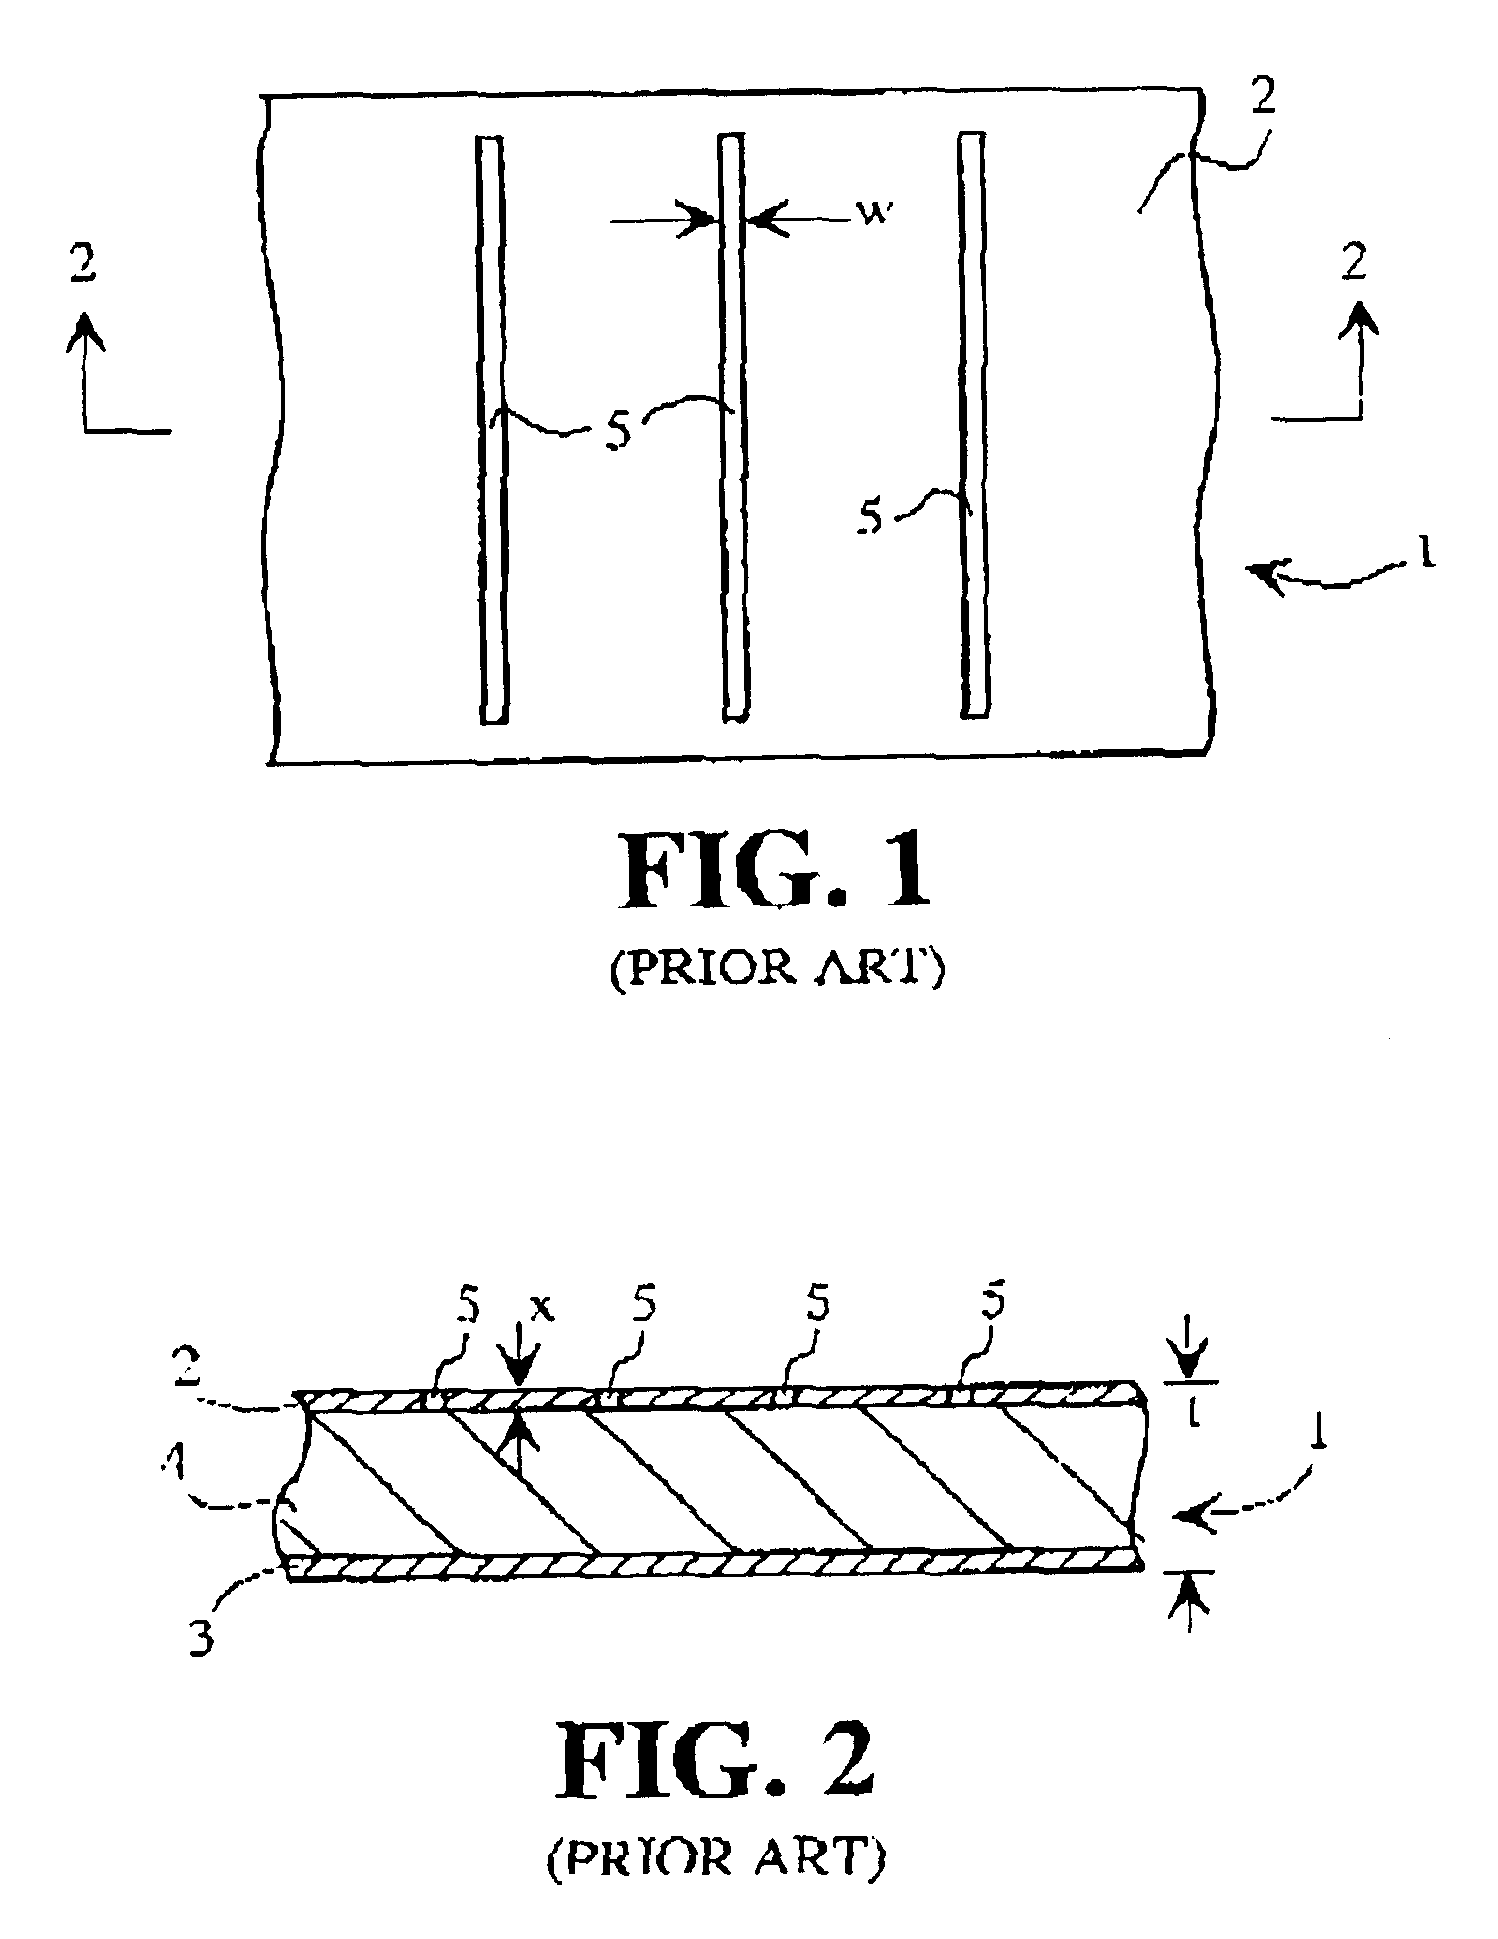 Waveguide for a traveling wave antenna